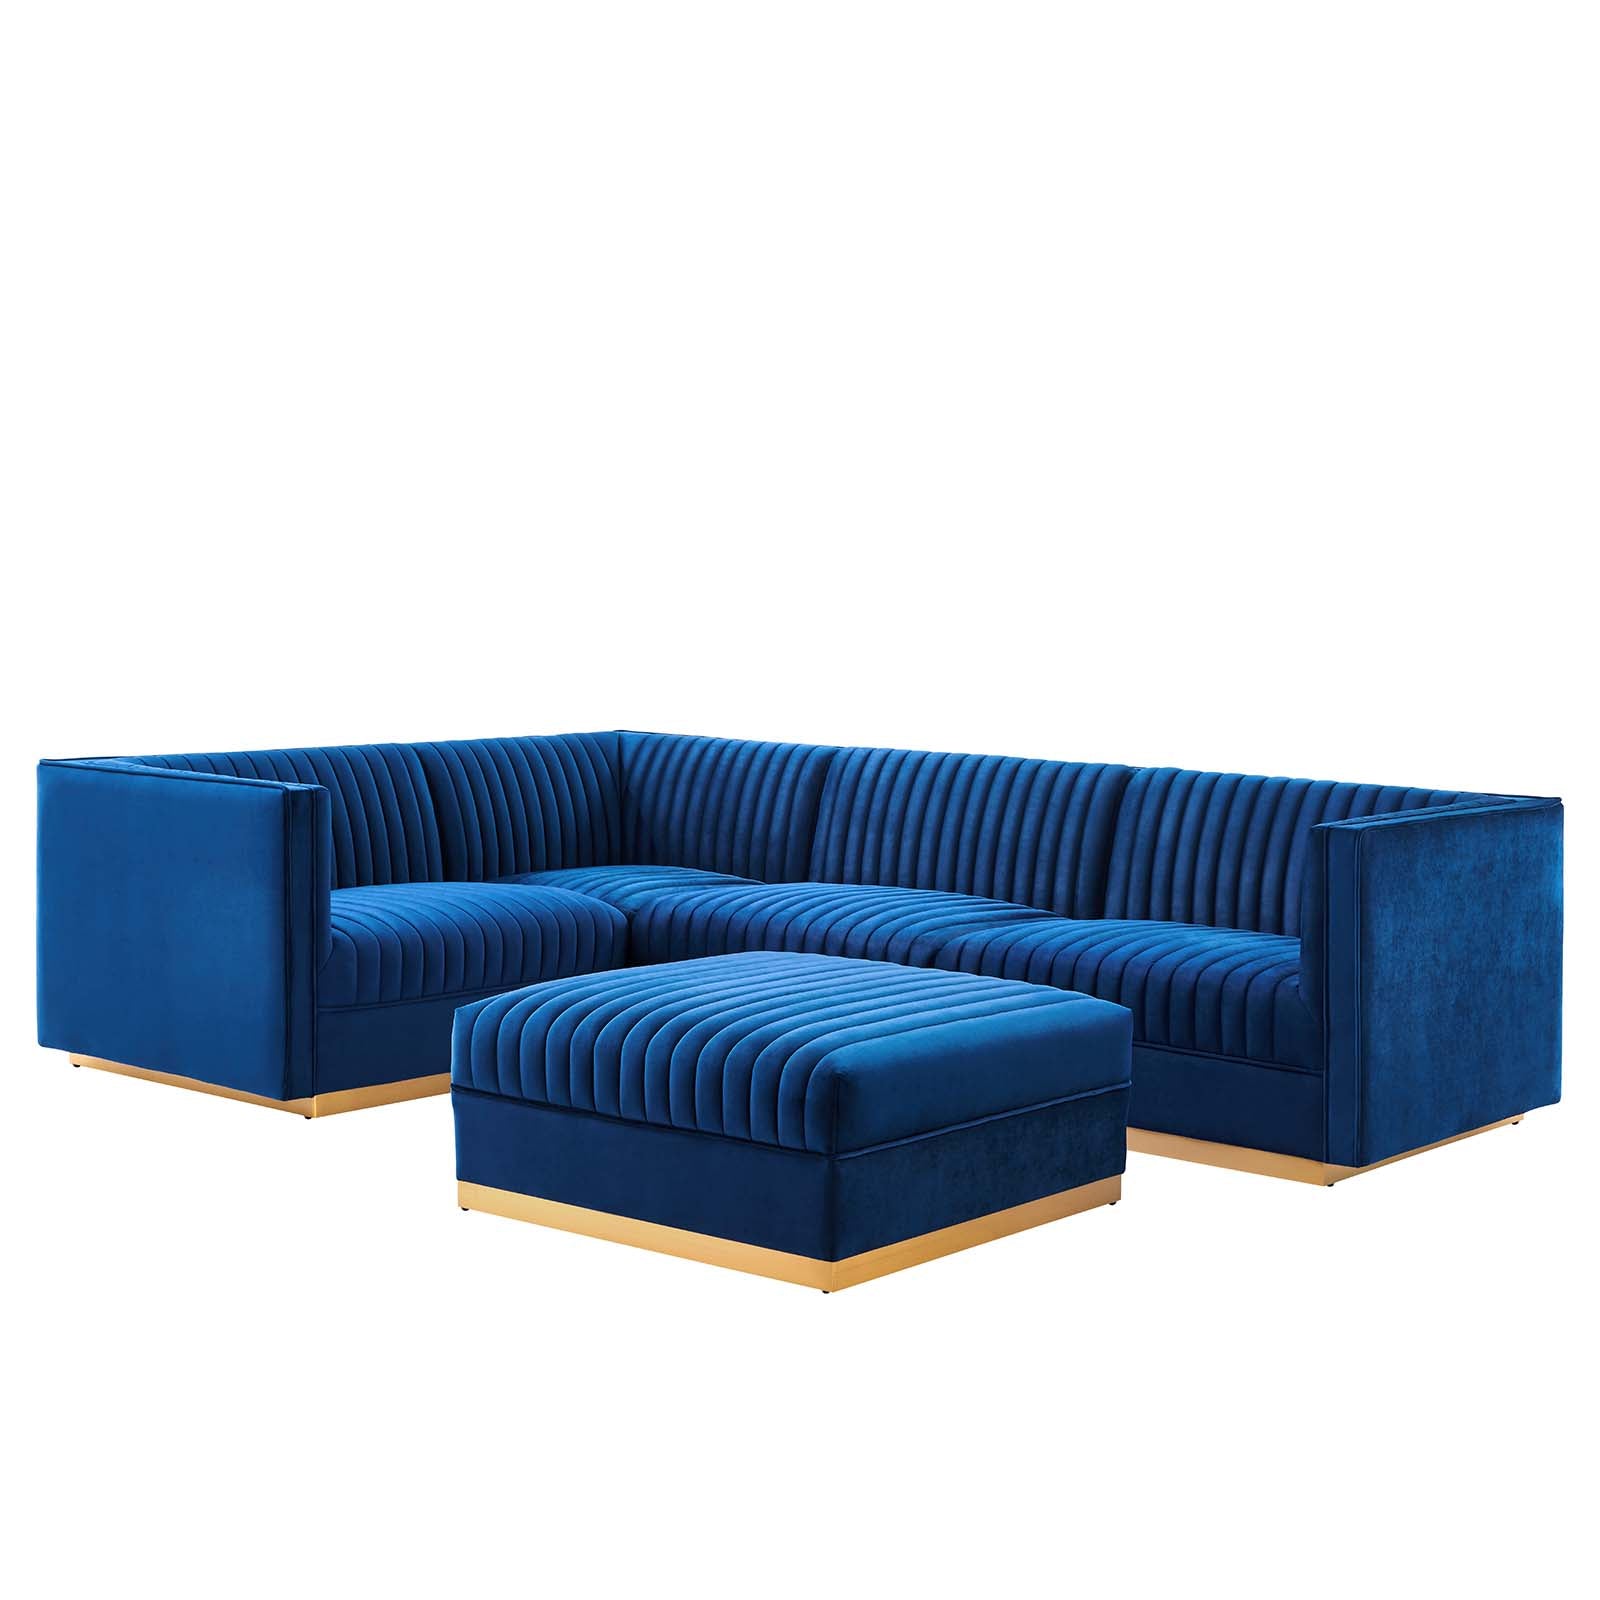 Modway Sectional Sofas - Sanguine Channel Tufted Performance Velvet 5 Piece Left-Facing Modular Sectional Sofa Navy